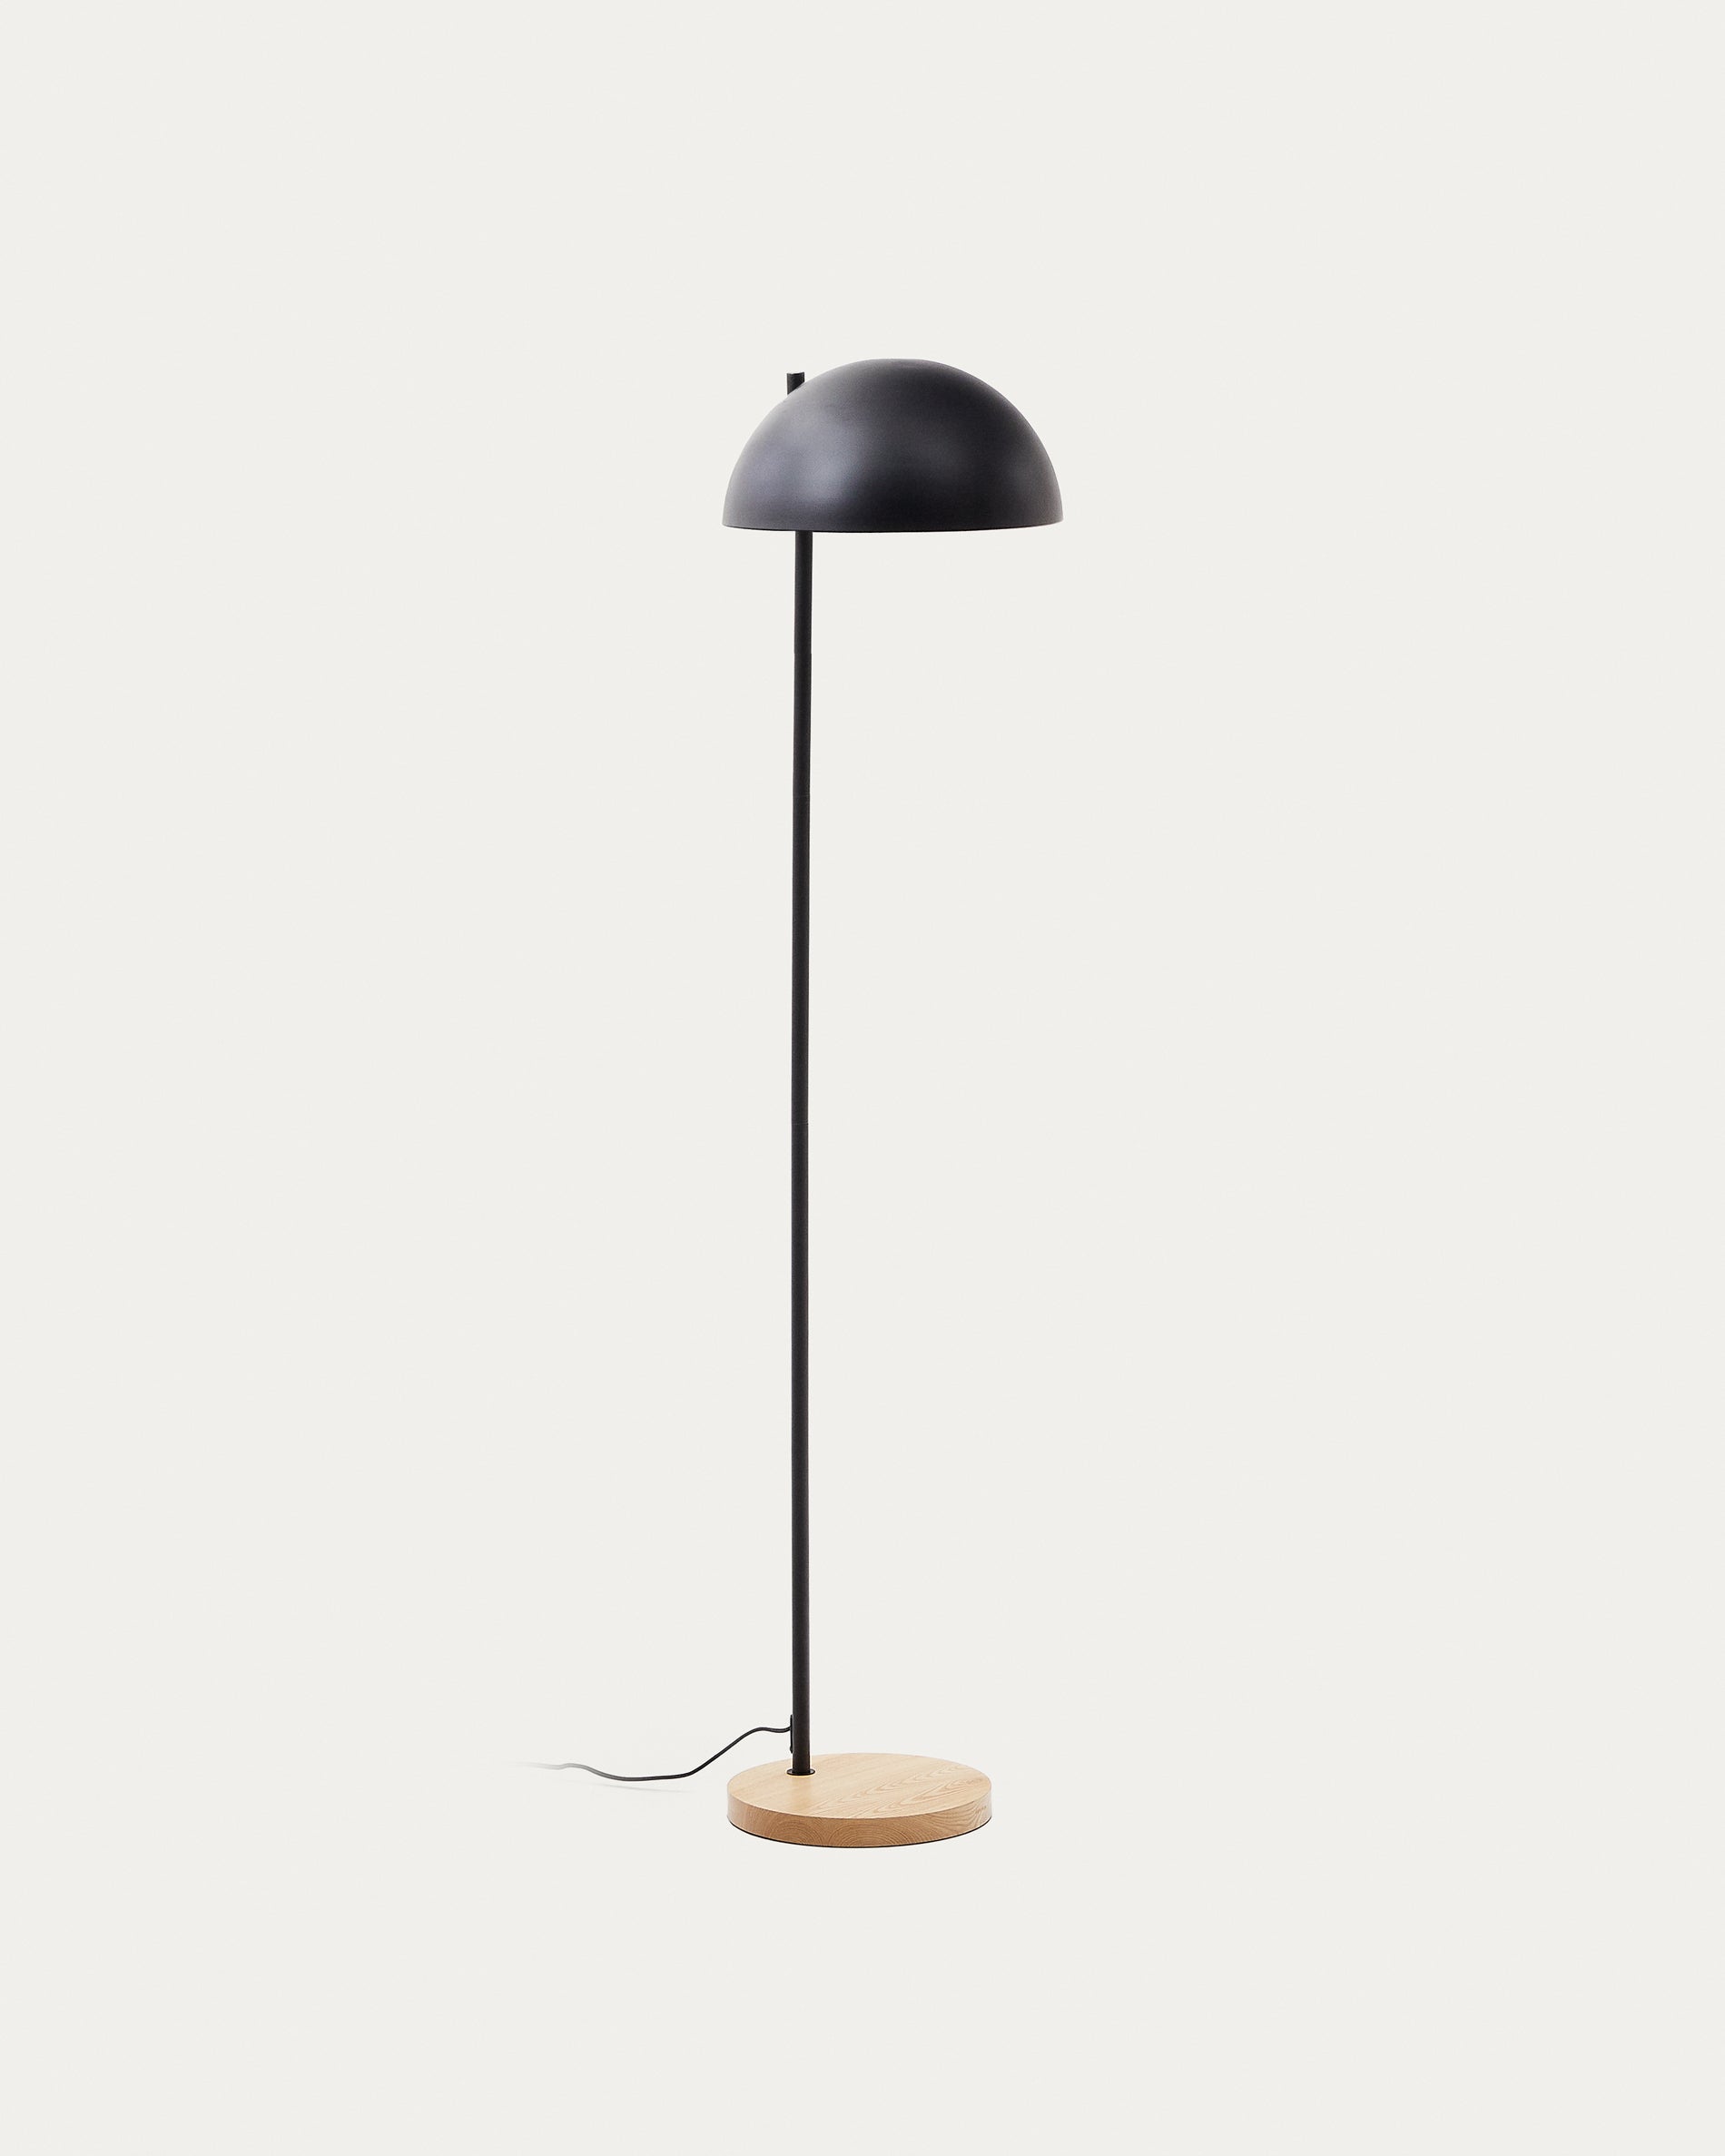 Catlar ash wood and metal floor lamp with black painted finish